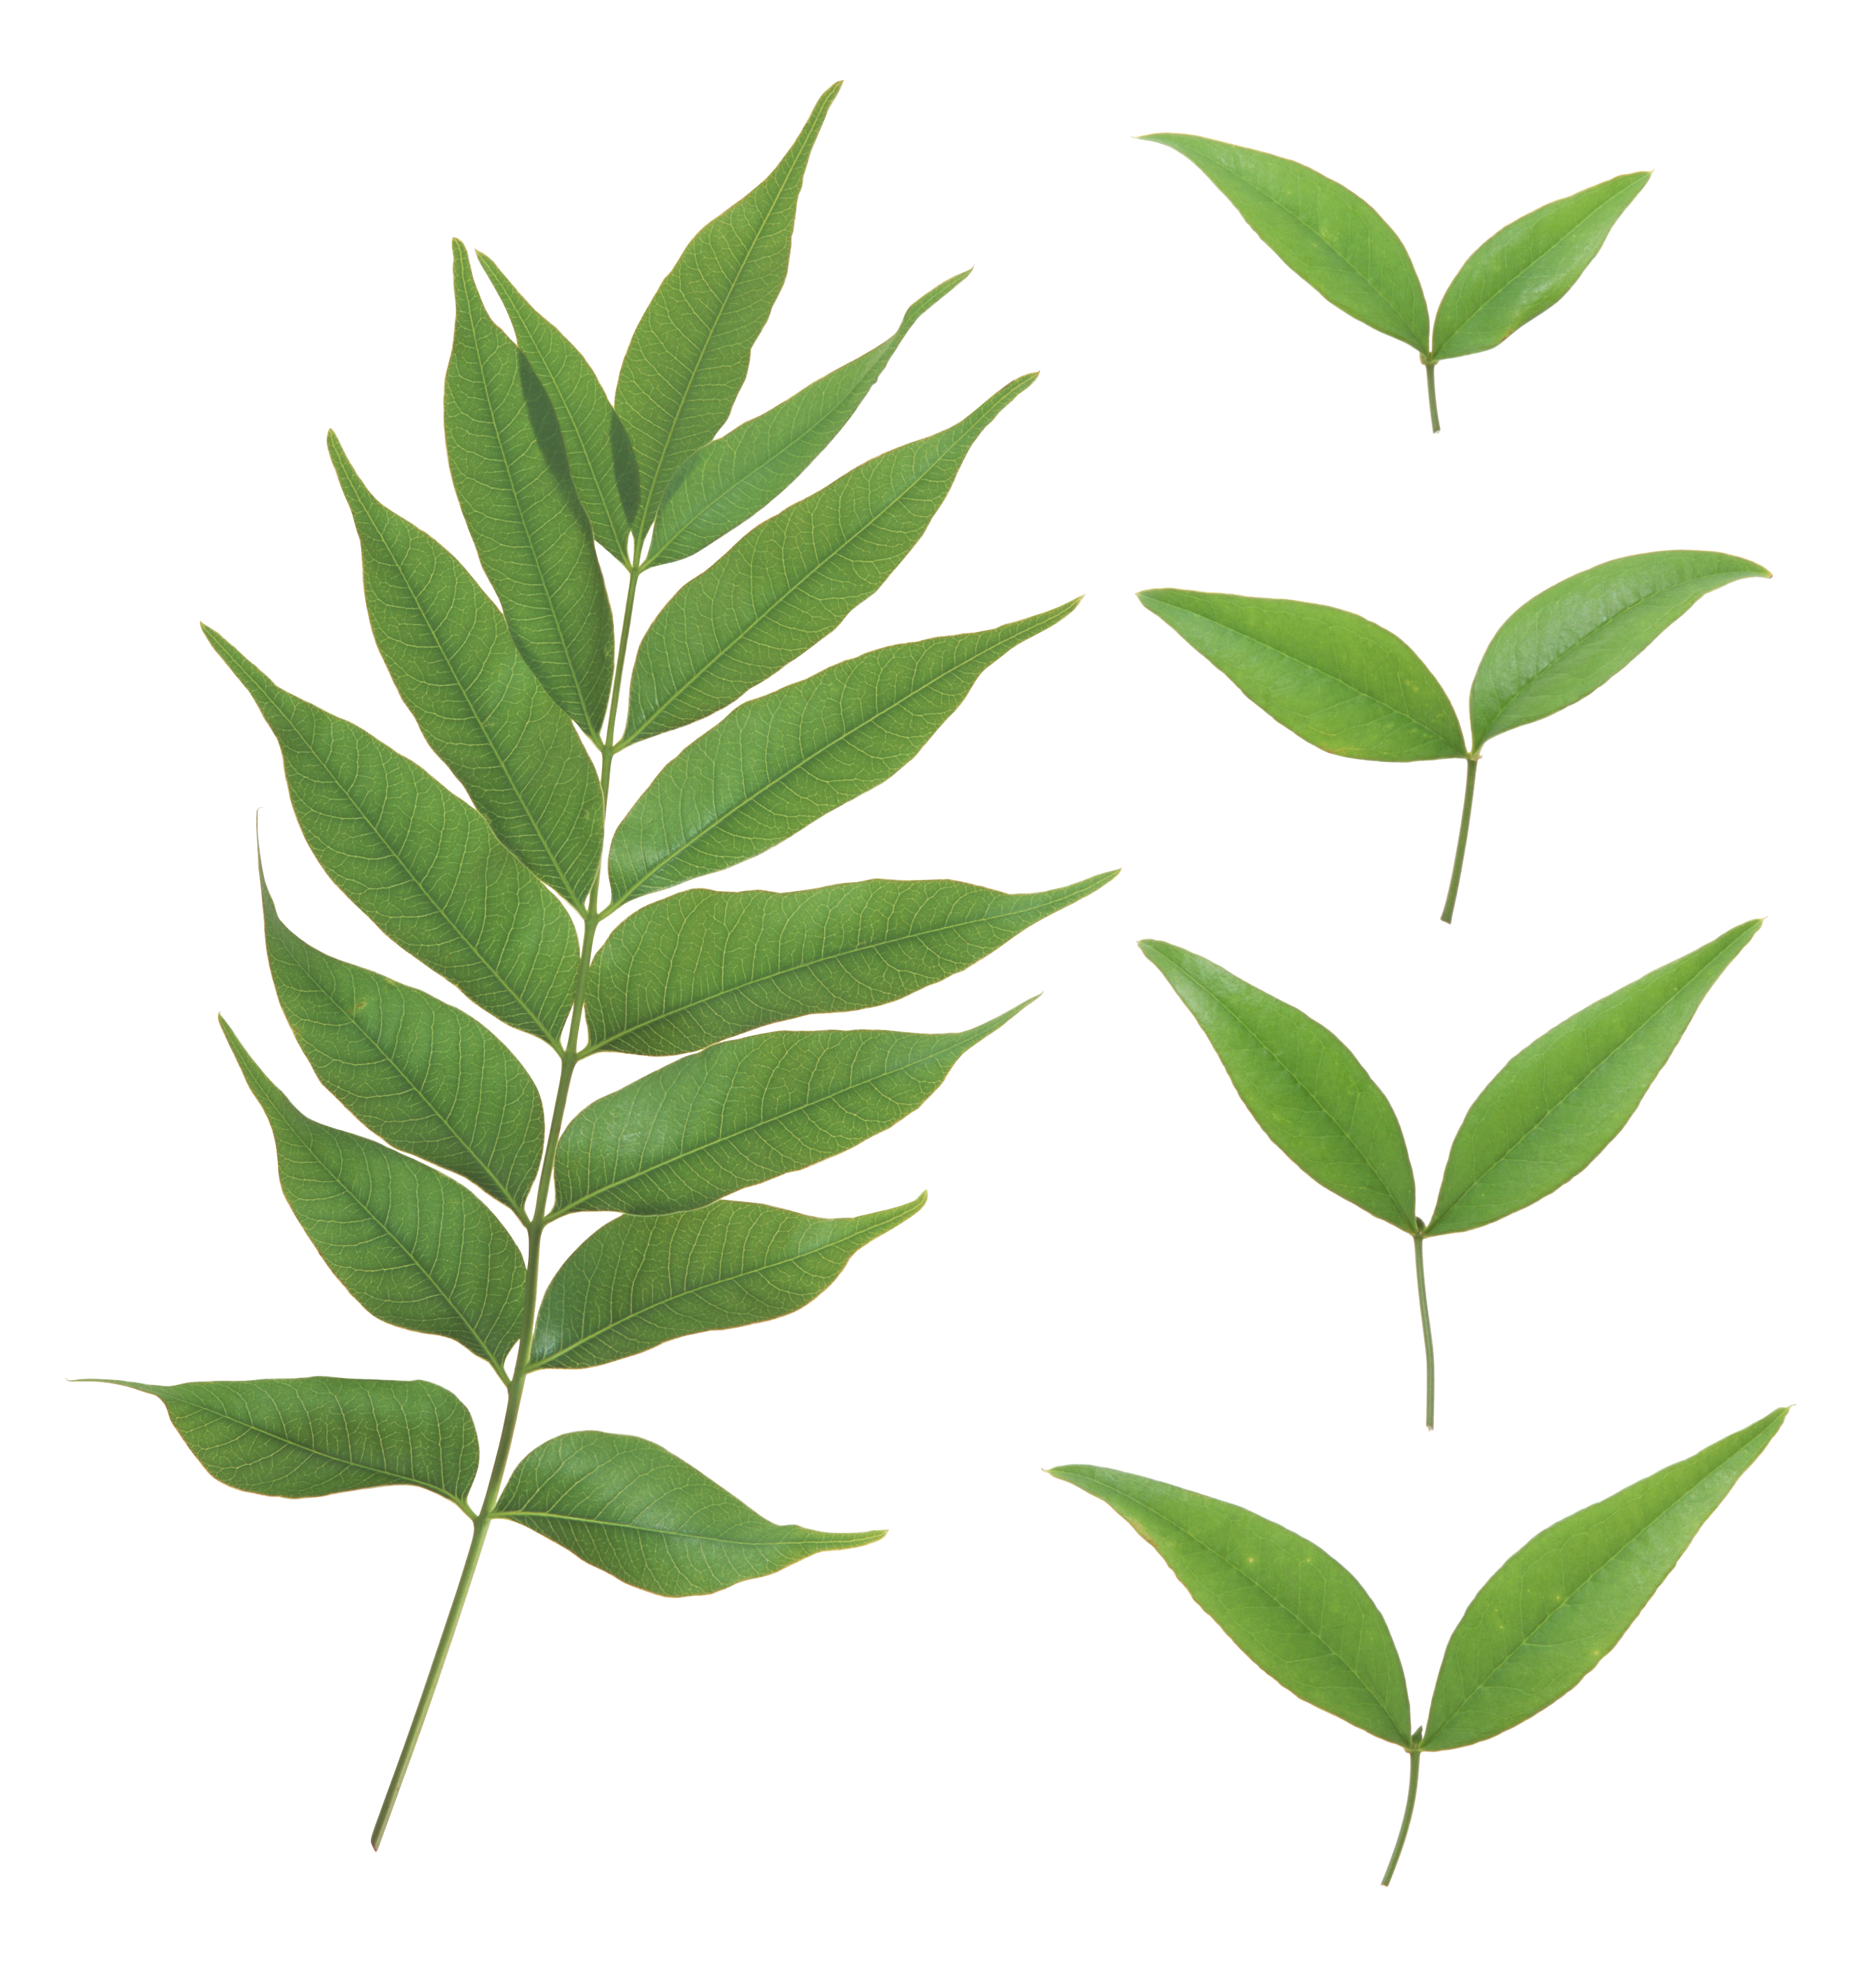 Green leaves PNG image free download pictures 